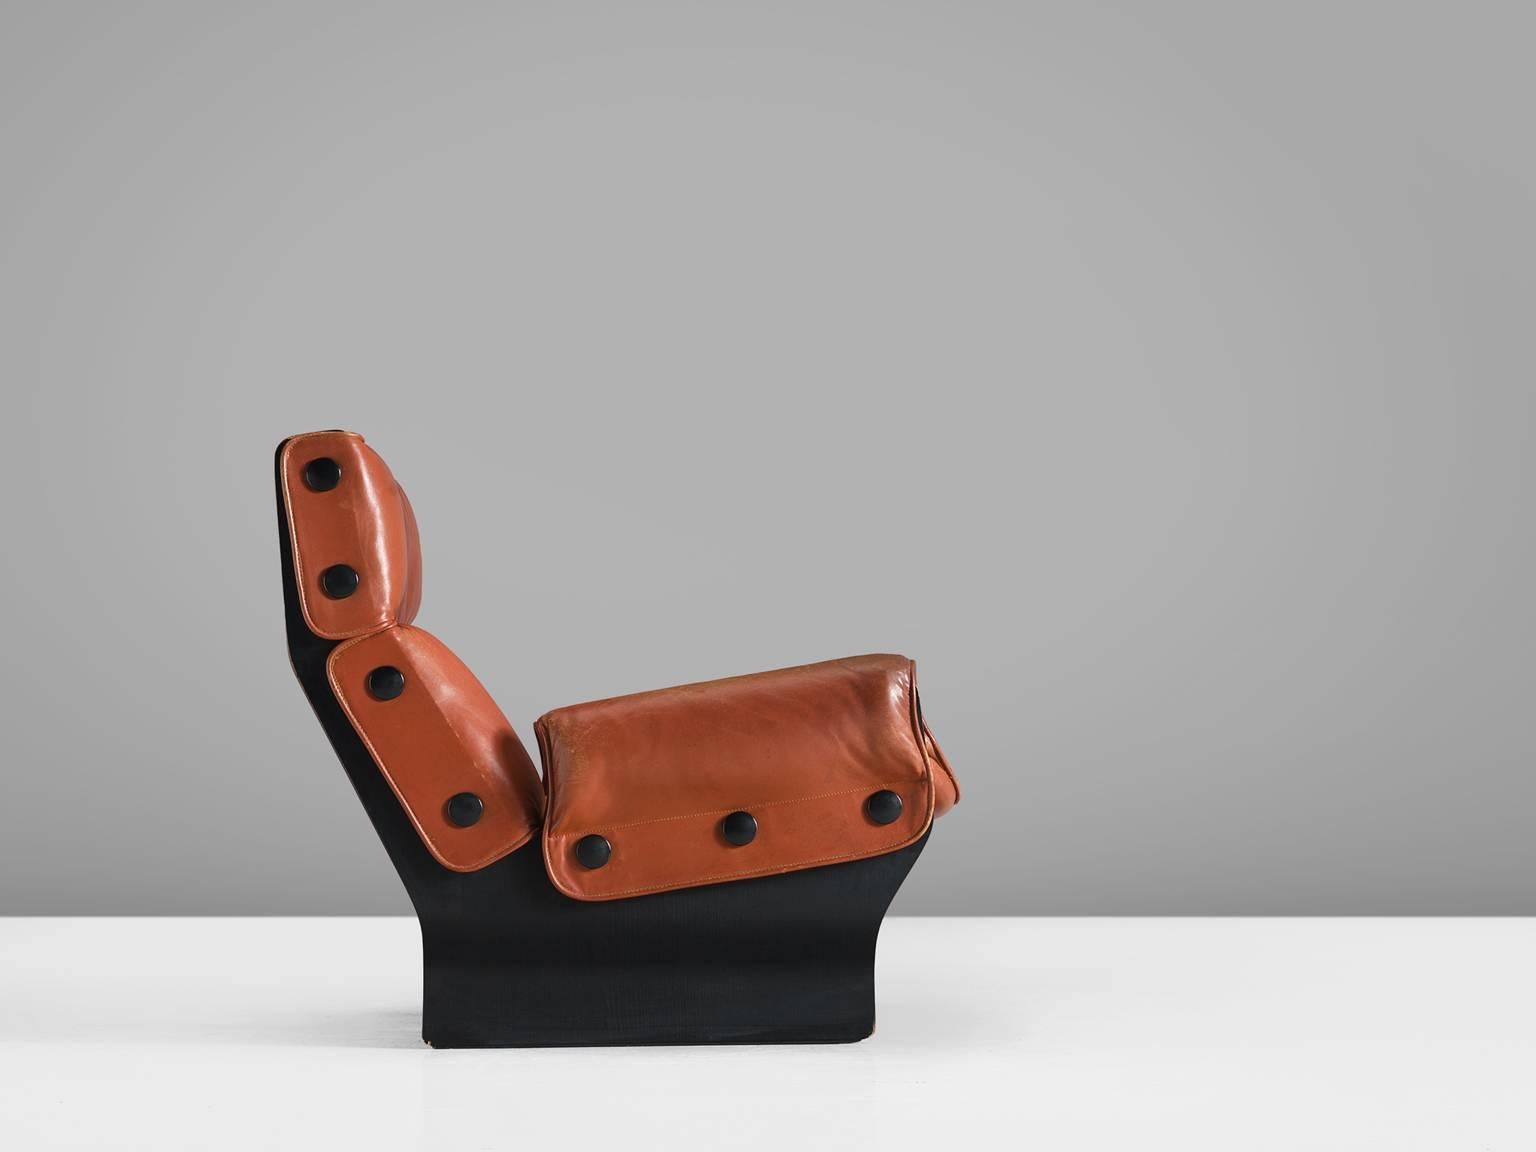 Osvaldo Borsani for Tecno, lounge chair 'Canada' T110, in plywood and cognac to orange leather, Italy, 1960s.

The 'Canada' chair is composed of two sides made of moulded plywood connected by two contoured solid wood crosspieces performed in teak.